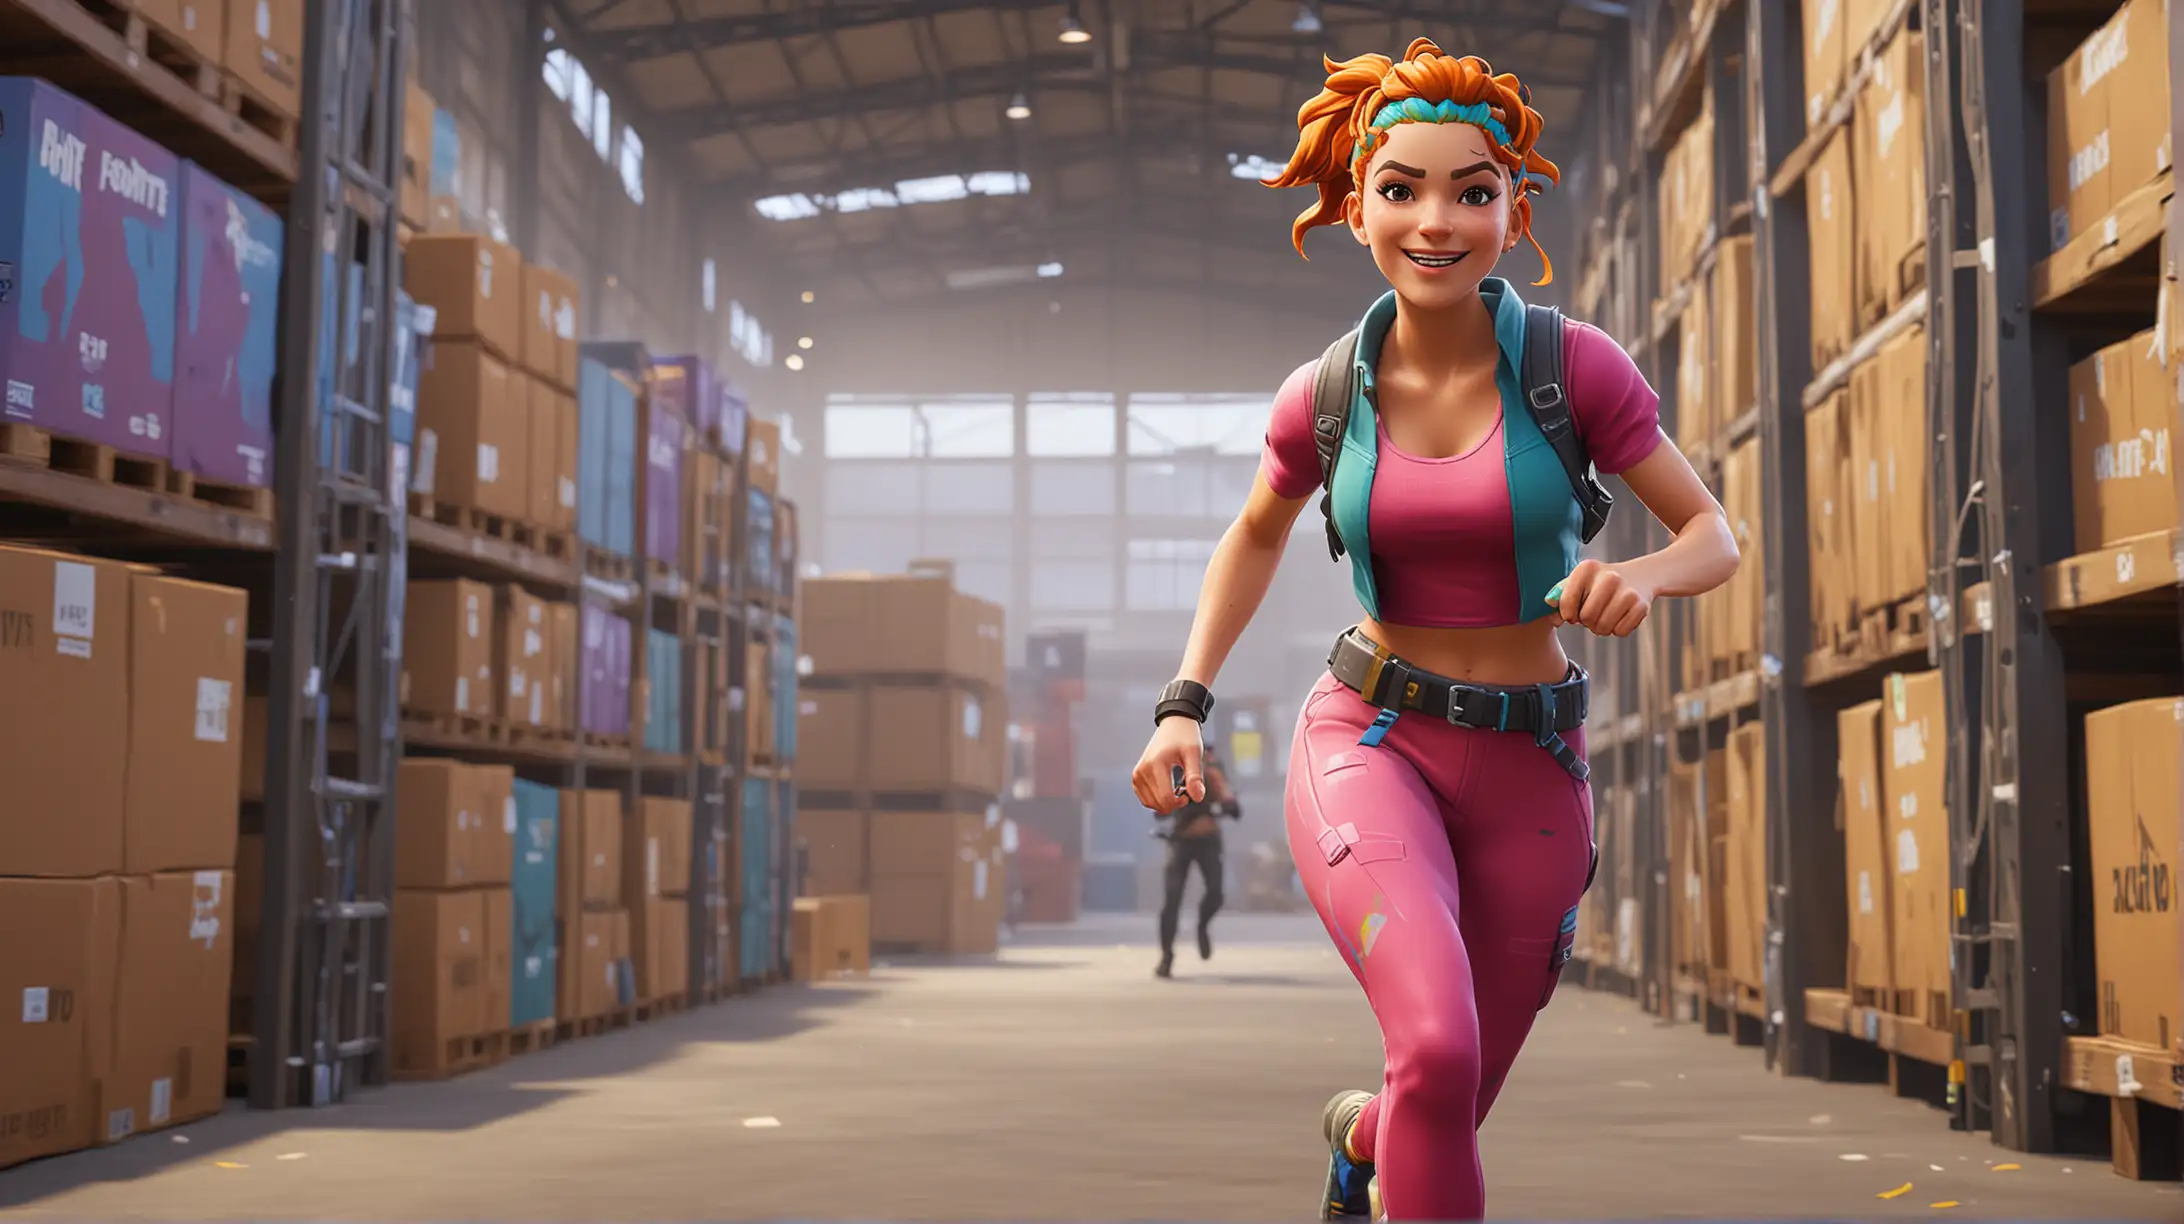 There is a colorful cool female Fortnite character,
the location is inside a colorful warehouse,
He is smiling and running fast,
Caucasian